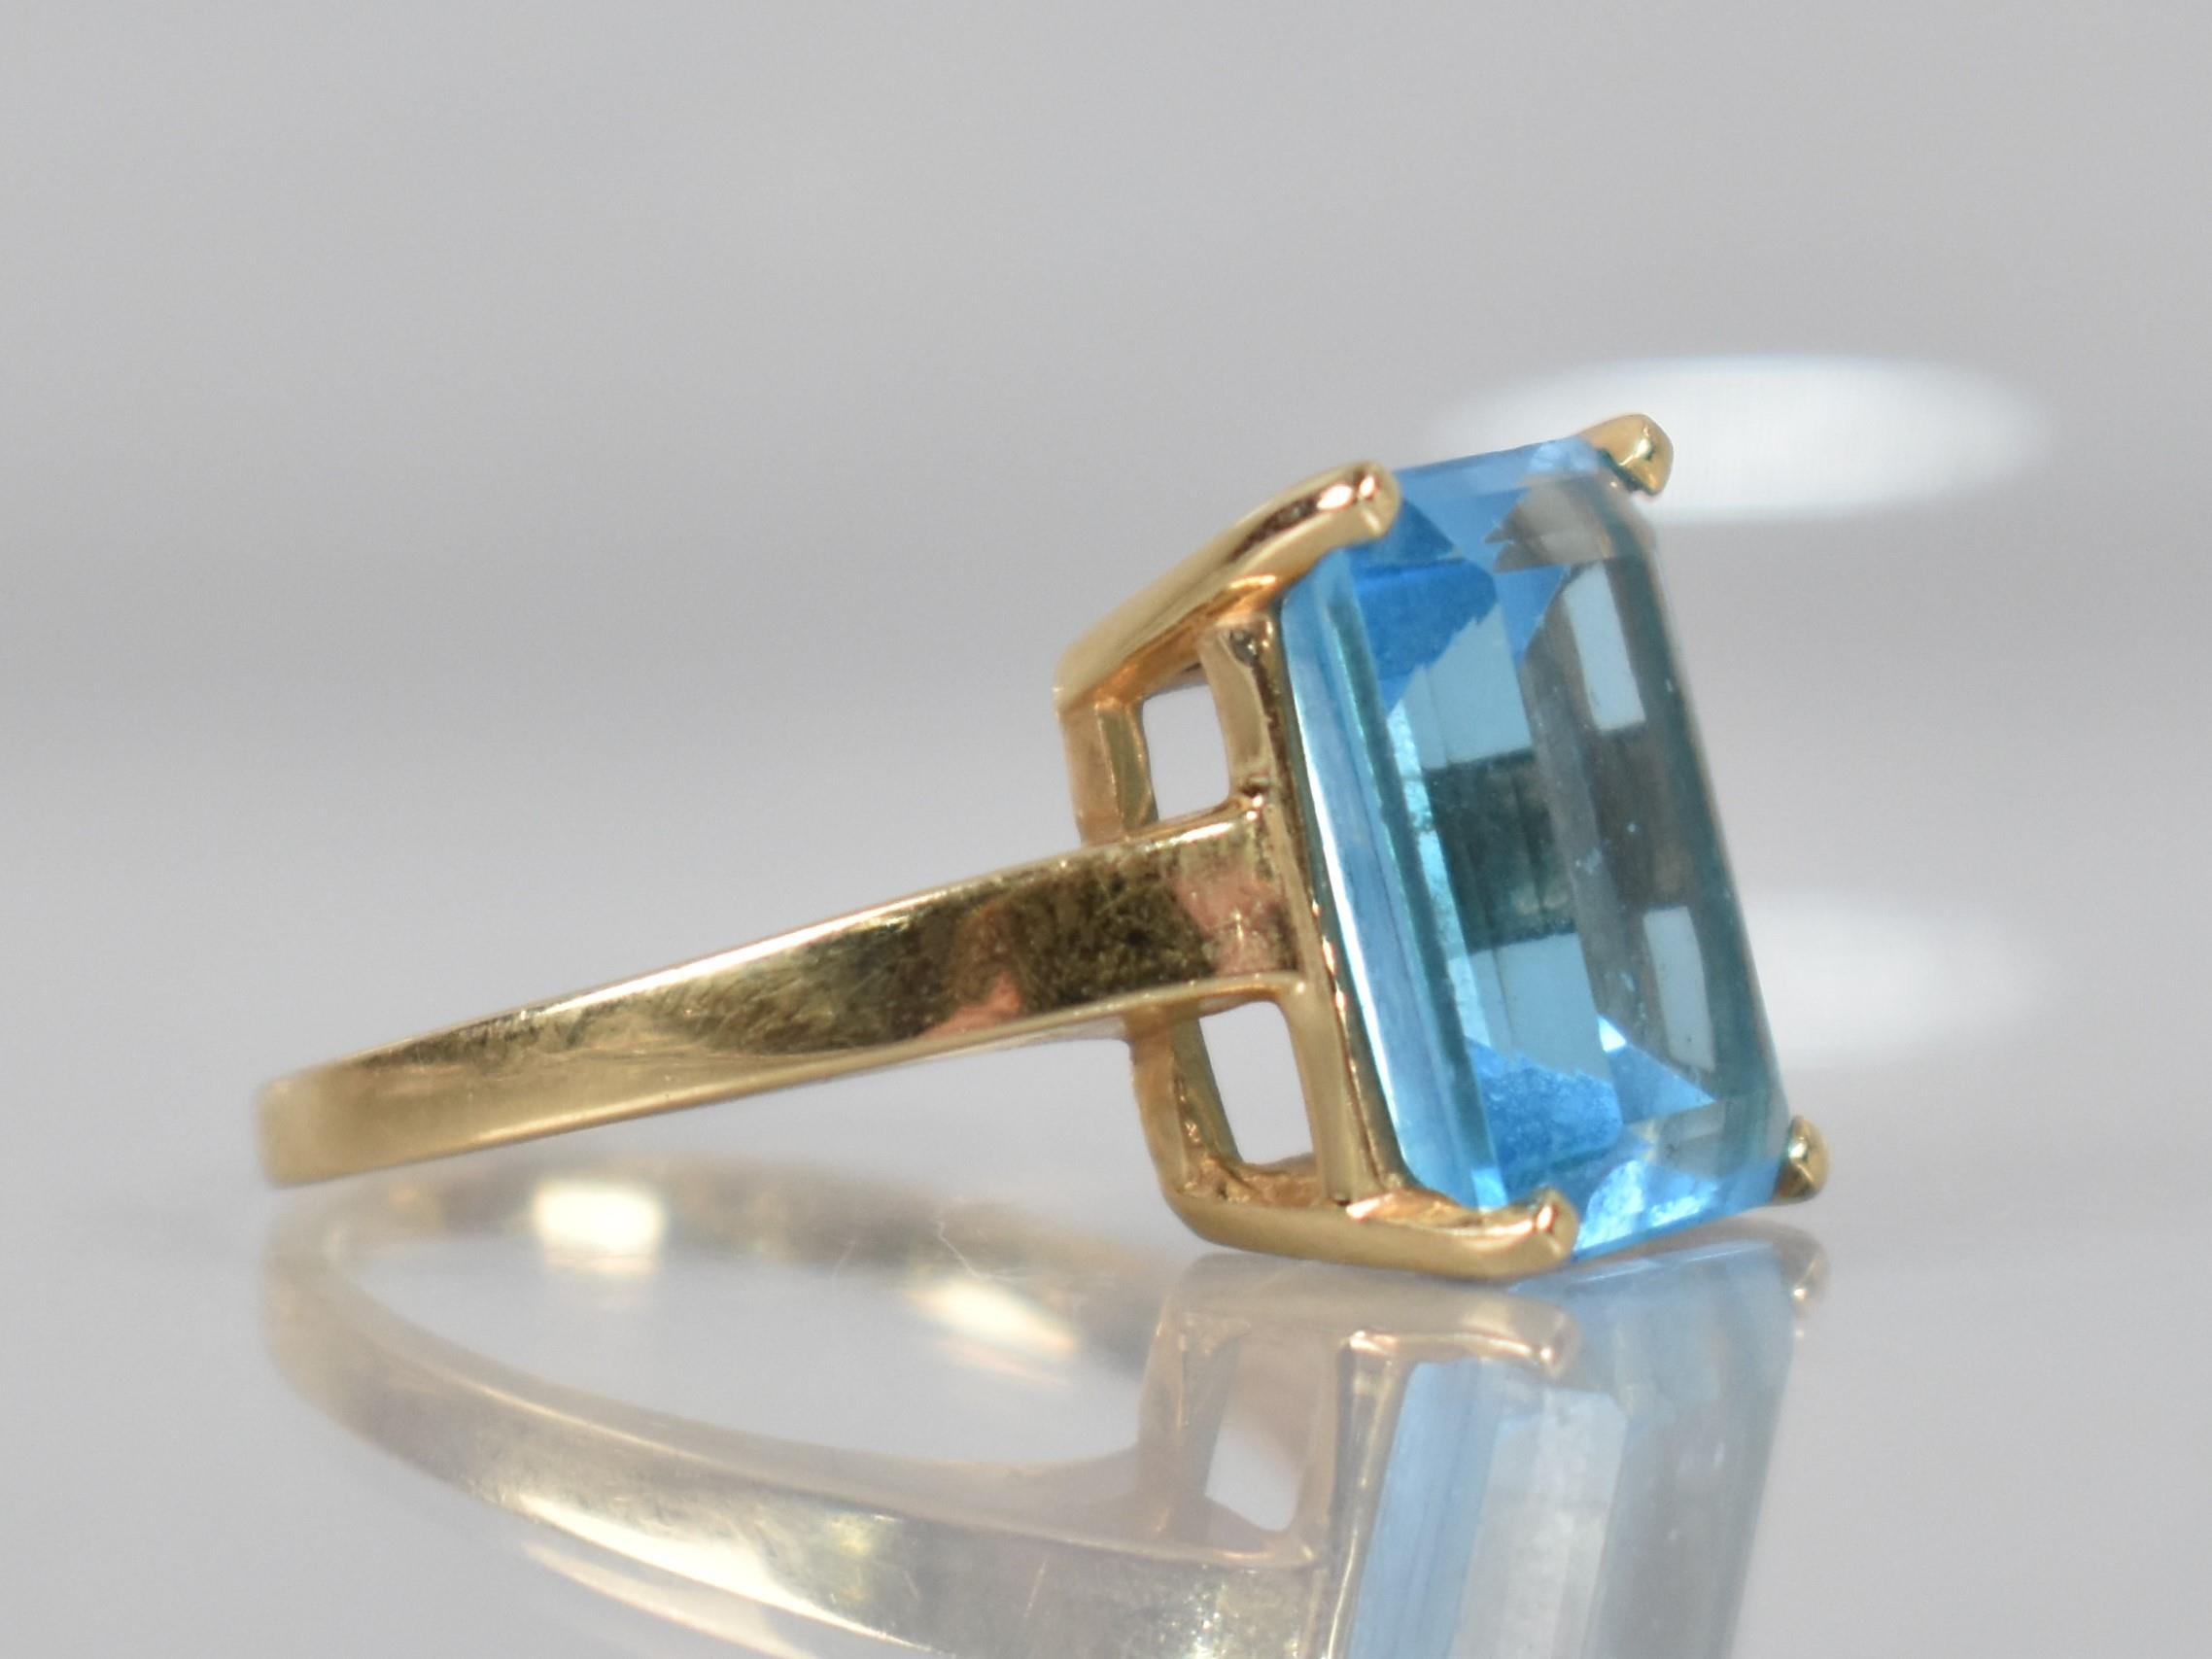 A 14ct Gold Mounted Blue Stone Ring, Testing as Sapphire, Emerald Cut Measuring 13.9mm by 9.7mm - Image 2 of 3